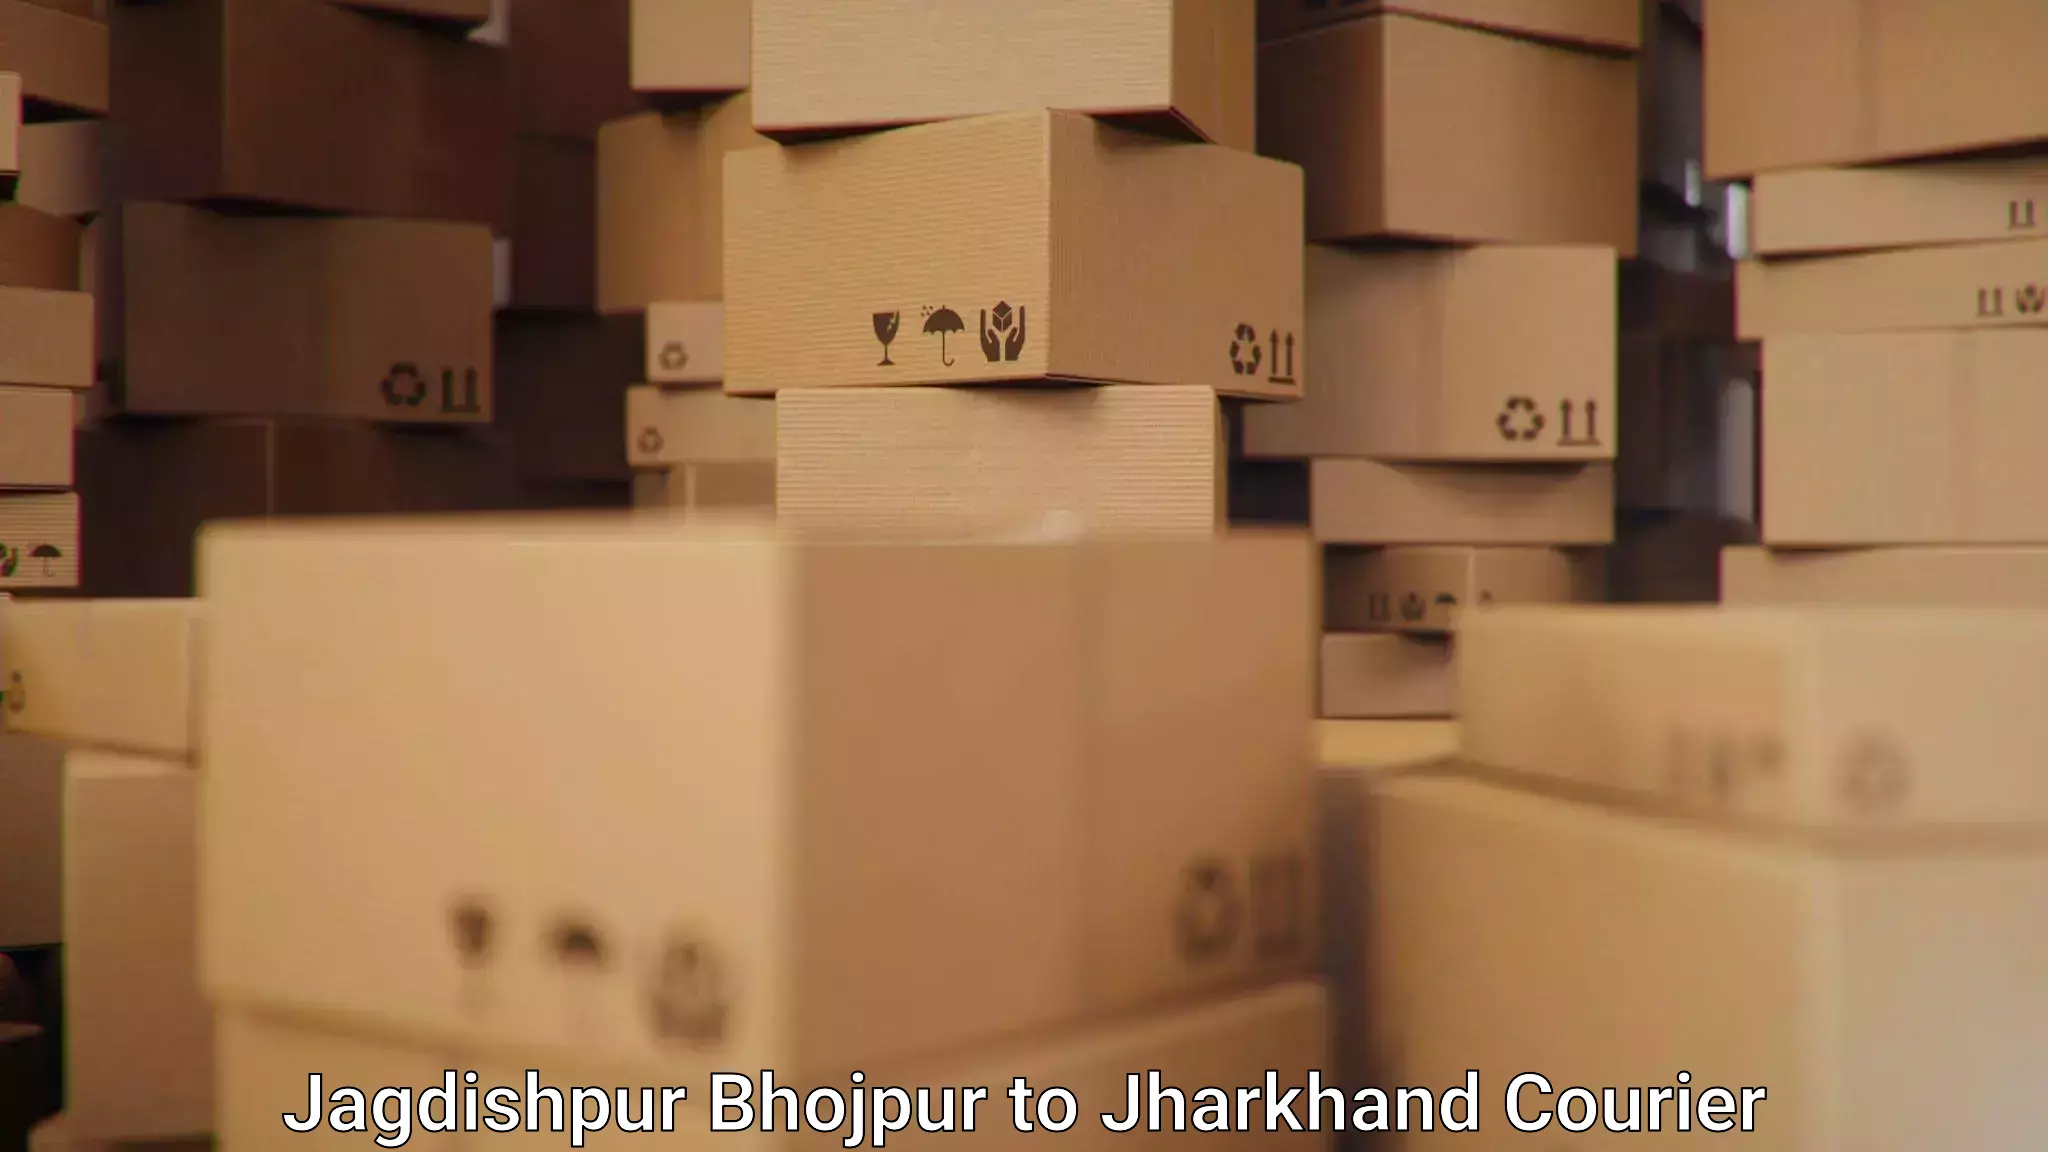 Scalable shipping solutions in Jagdishpur Bhojpur to Bokaro Steel City